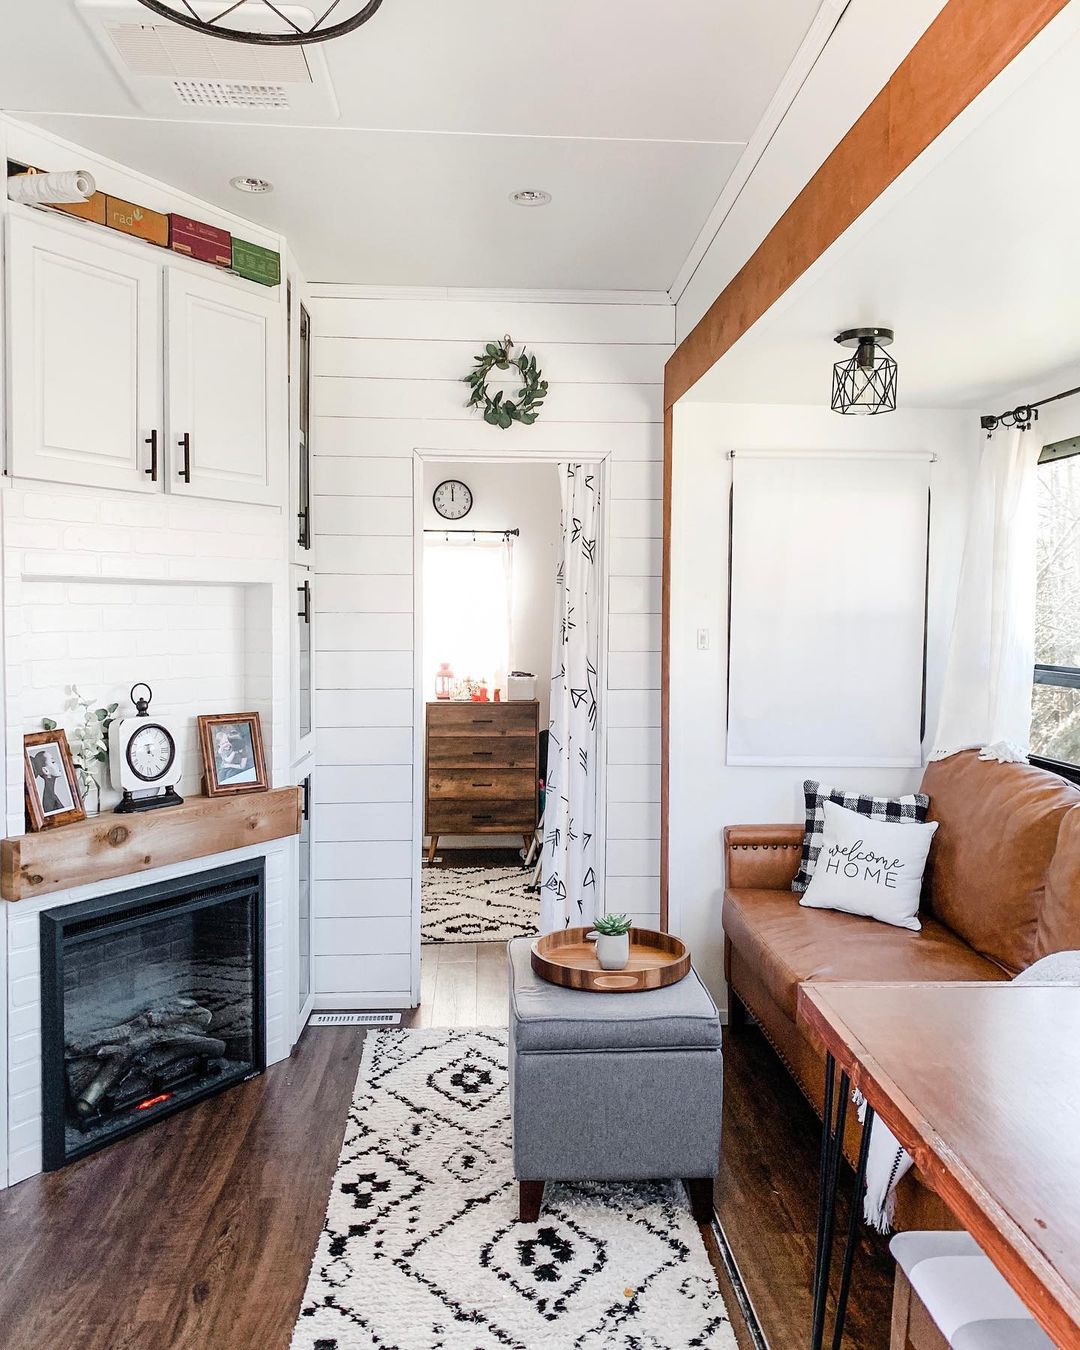 RV interior featuring a fireplace. Photo by Instagram user @thetravelingcouches.